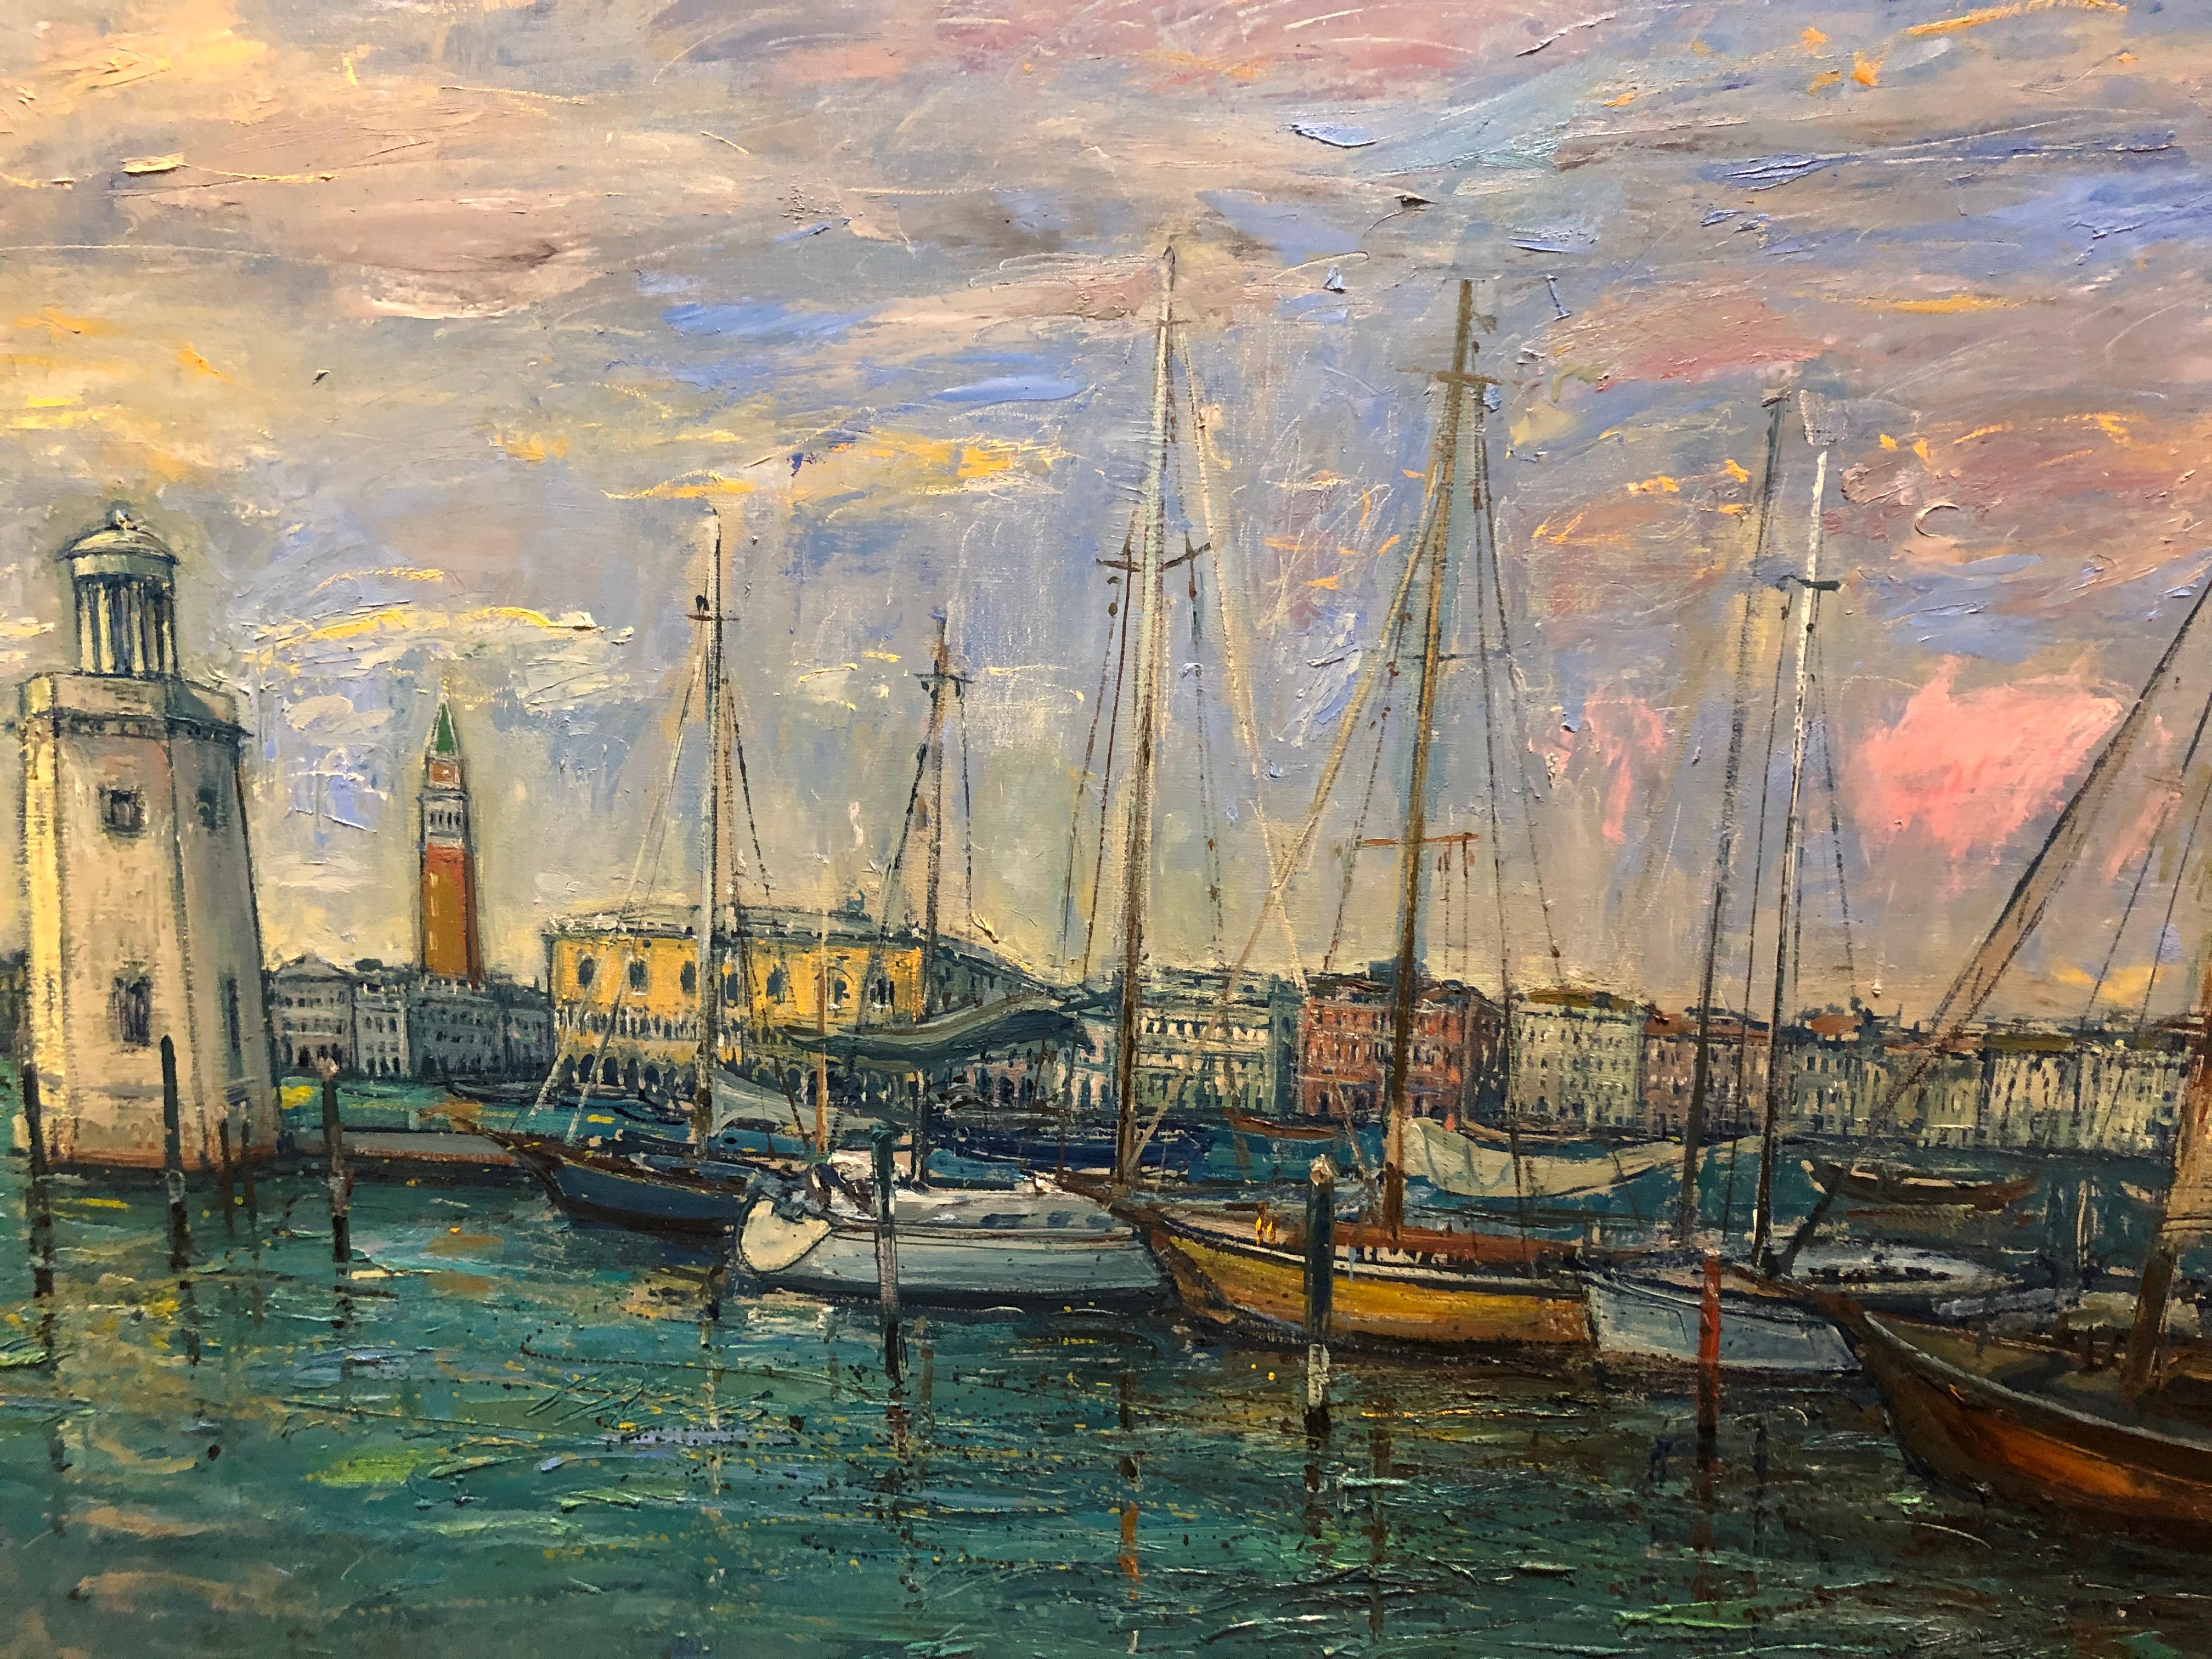 Bruno Zupan Landscape Painting - "Yachts by San Giorgio, Venice"